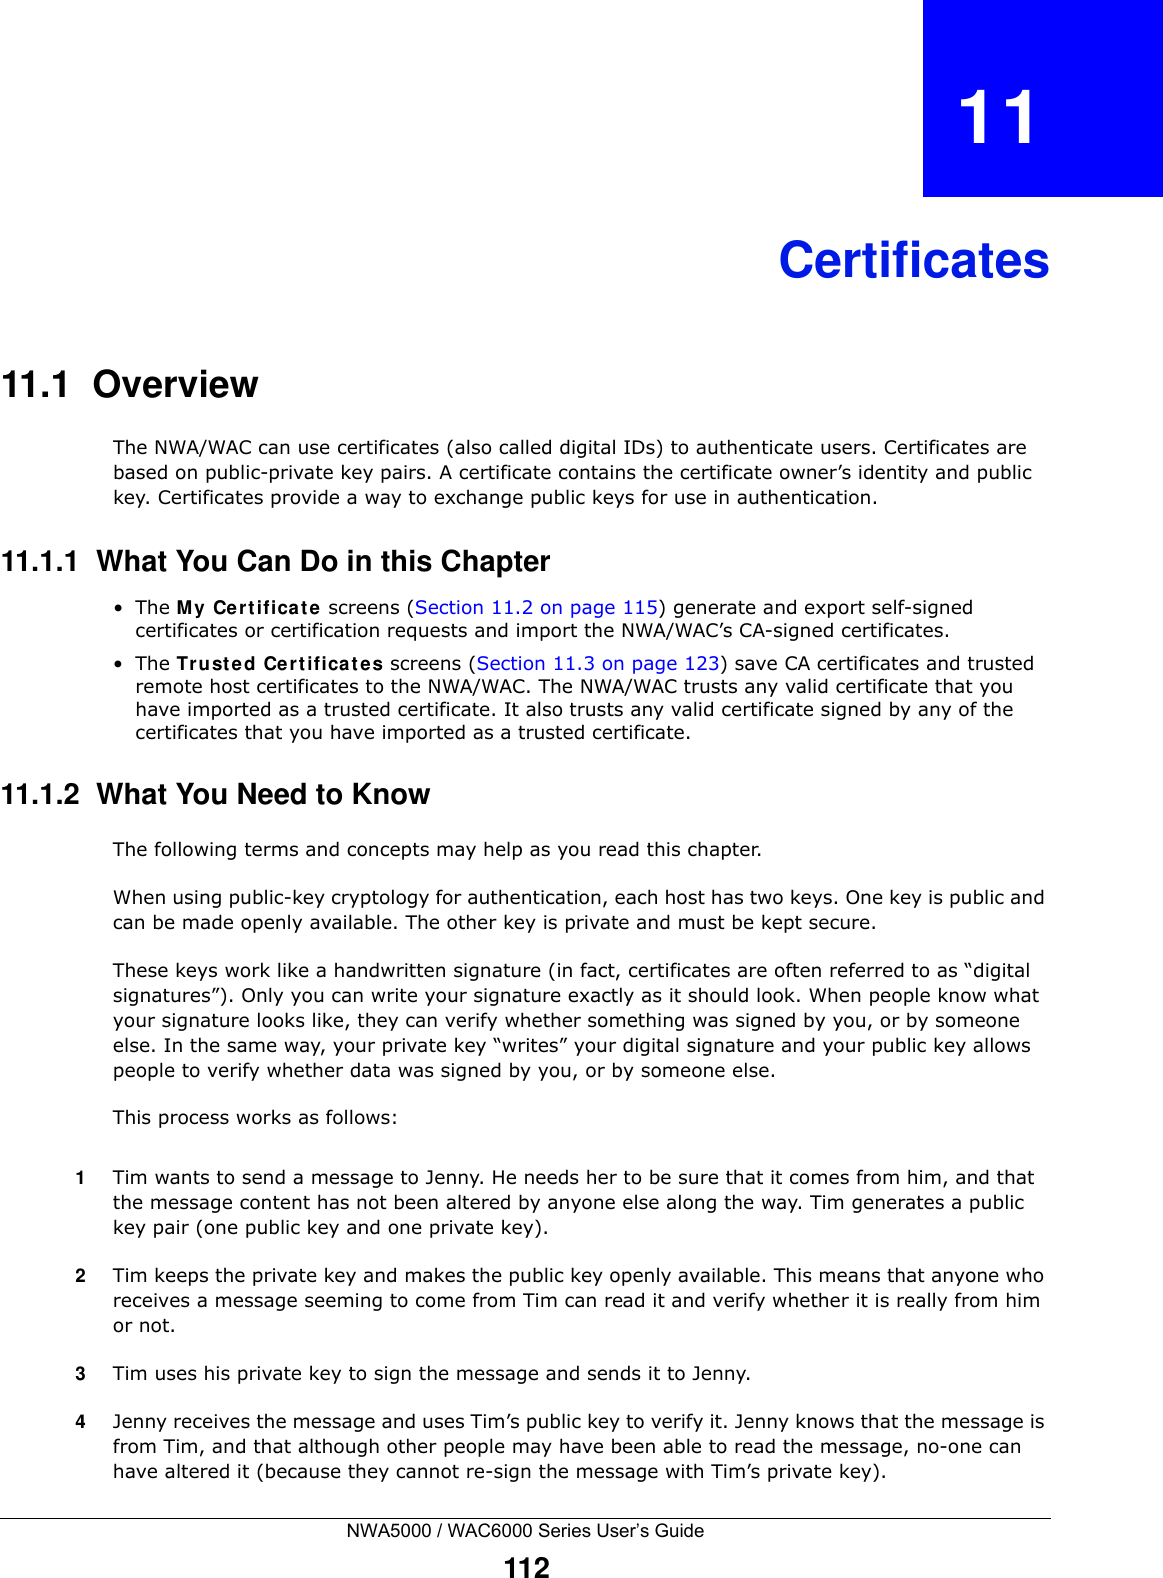 NWA5000 / WAC6000 Series User’s Guide112CHAPTER   11Certificates11.1  OverviewThe NWA/WAC can use certificates (also called digital IDs) to authenticate users. Certificates are based on public-private key pairs. A certificate contains the certificate owner’s identity and public key. Certificates provide a way to exchange public keys for use in authentication. 11.1.1  What You Can Do in this Chapter•The My Certifica te  screens (Section 11.2 on page 115) generate and export self-signed certificates or certification requests and import the NWA/WAC’s CA-signed certificates.•The Truste d Ce rt ificat es screens (Section 11.3 on page 123) save CA certificates and trusted remote host certificates to the NWA/WAC. The NWA/WAC trusts any valid certificate that you have imported as a trusted certificate. It also trusts any valid certificate signed by any of the certificates that you have imported as a trusted certificate. 11.1.2  What You Need to KnowThe following terms and concepts may help as you read this chapter.When using public-key cryptology for authentication, each host has two keys. One key is public and can be made openly available. The other key is private and must be kept secure. These keys work like a handwritten signature (in fact, certificates are often referred to as “digital signatures”). Only you can write your signature exactly as it should look. When people know what your signature looks like, they can verify whether something was signed by you, or by someone else. In the same way, your private key “writes” your digital signature and your public key allows people to verify whether data was signed by you, or by someone else. This process works as follows:1Tim wants to send a message to Jenny. He needs her to be sure that it comes from him, and that the message content has not been altered by anyone else along the way. Tim generates a public key pair (one public key and one private key). 2Tim keeps the private key and makes the public key openly available. This means that anyone who receives a message seeming to come from Tim can read it and verify whether it is really from him or not. 3Tim uses his private key to sign the message and sends it to Jenny.4Jenny receives the message and uses Tim’s public key to verify it. Jenny knows that the message is from Tim, and that although other people may have been able to read the message, no-one can have altered it (because they cannot re-sign the message with Tim’s private key).